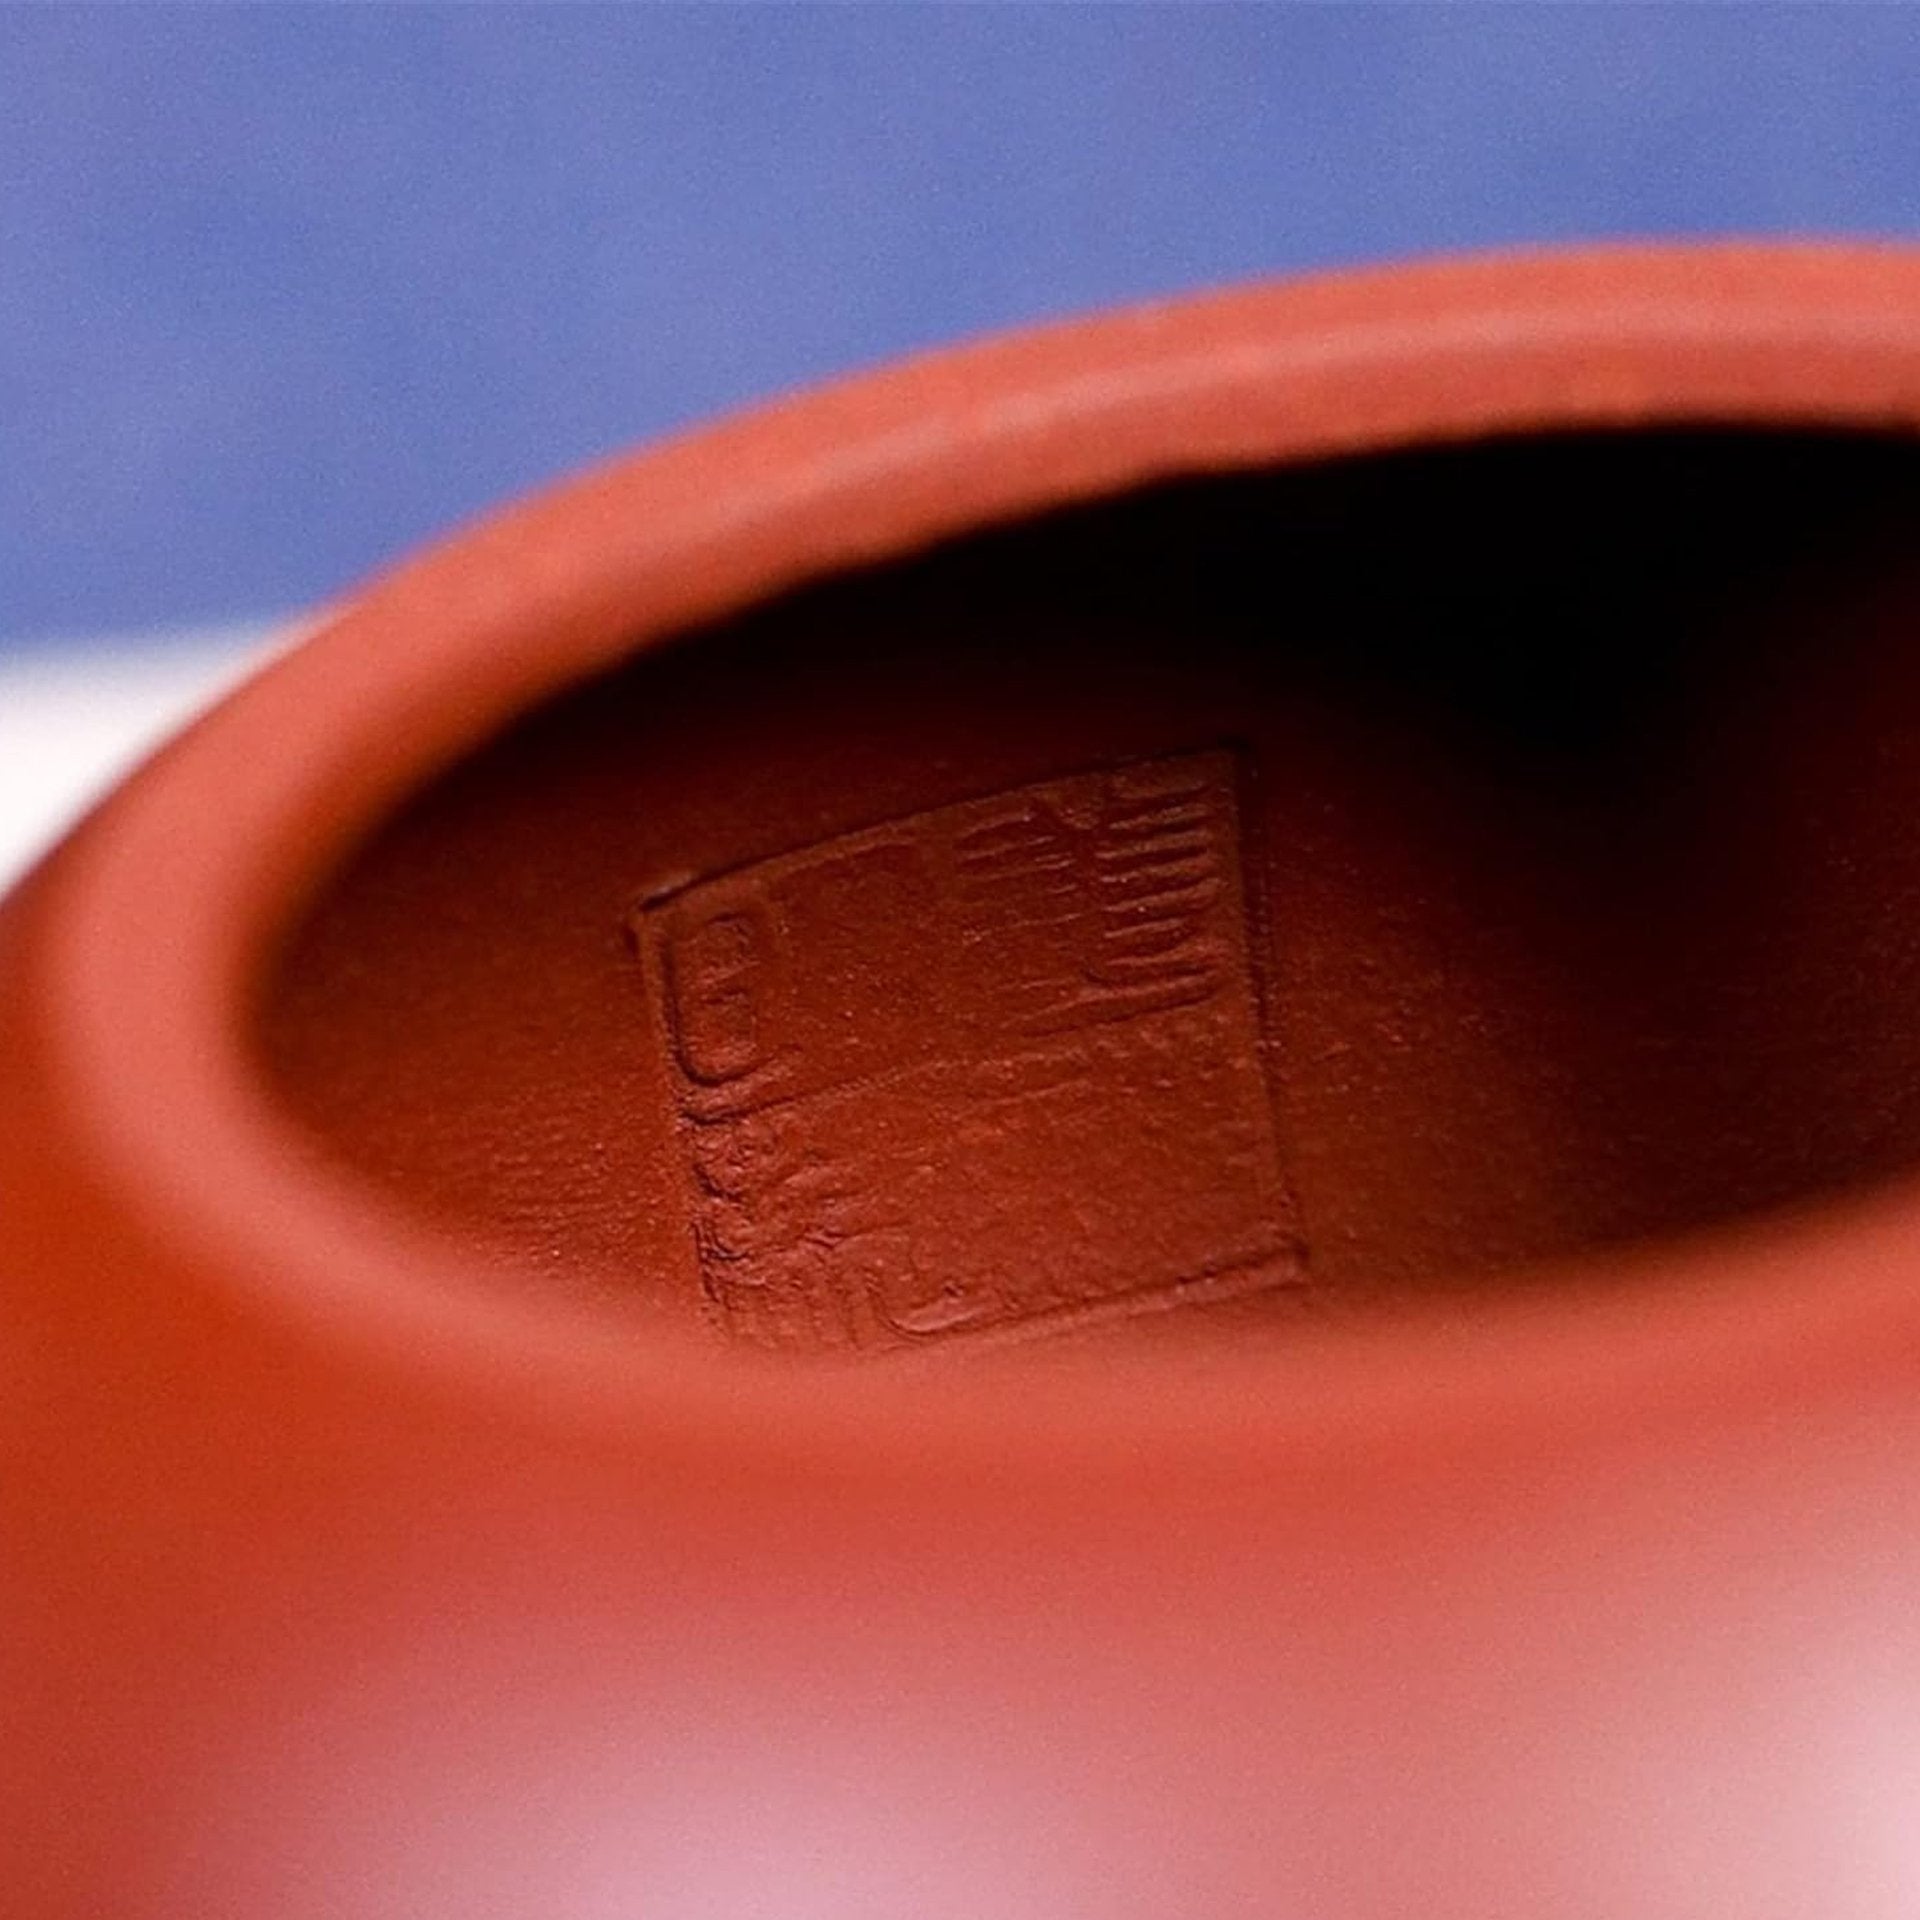 Close-up of red teapot held in hand, showing the delicate engravings and design.